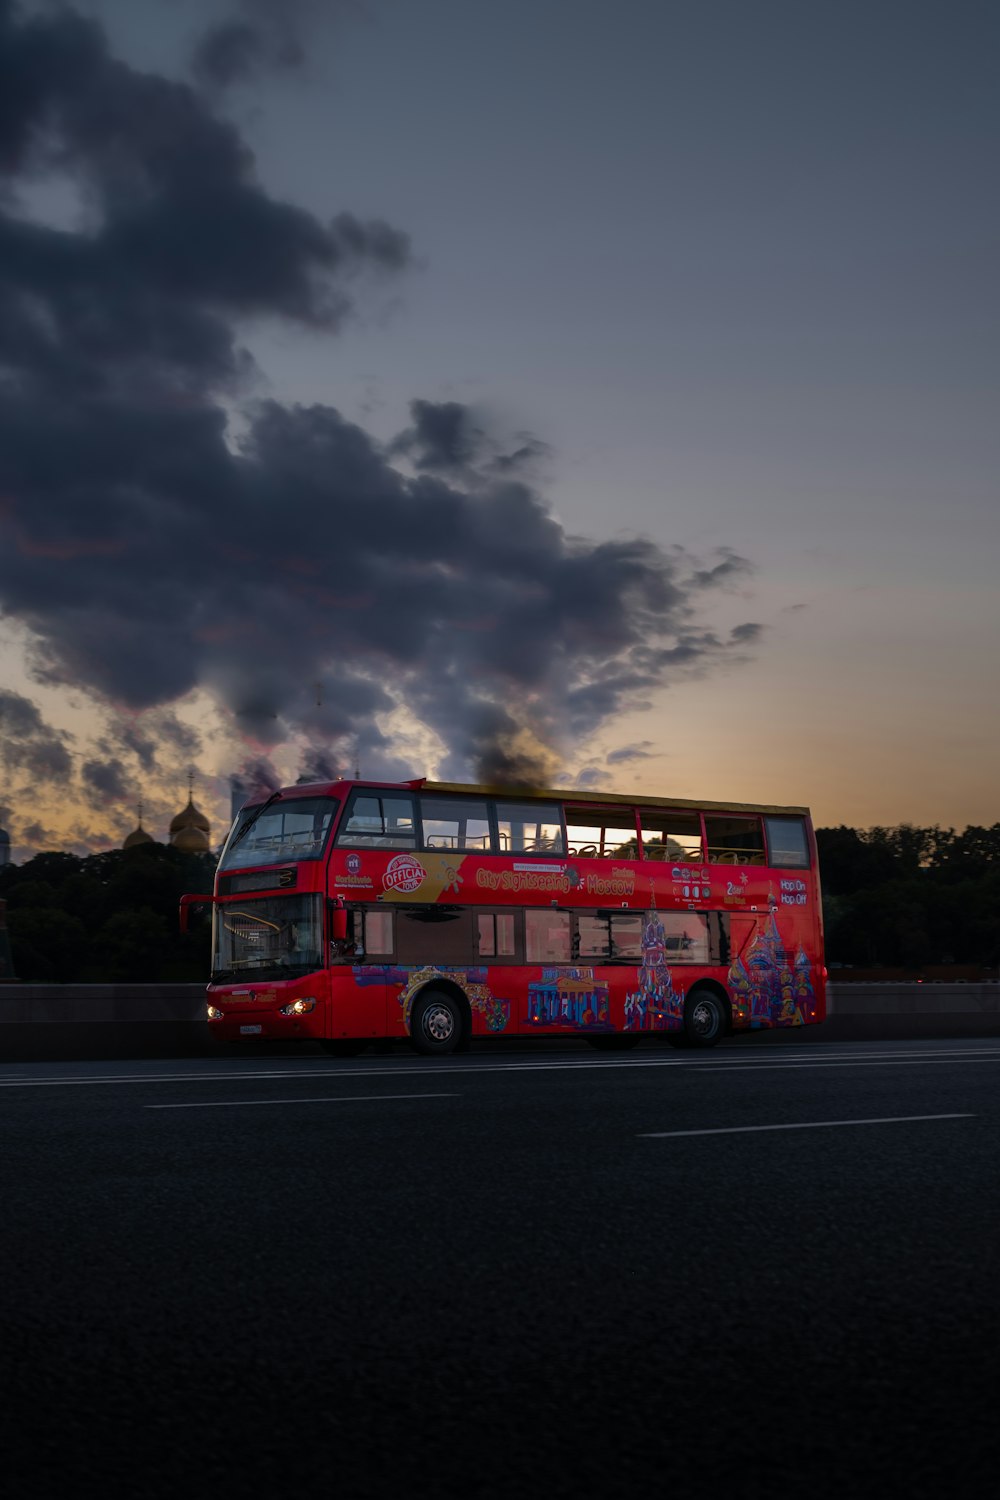 red double decker bus on road under cloudy sky during daytime